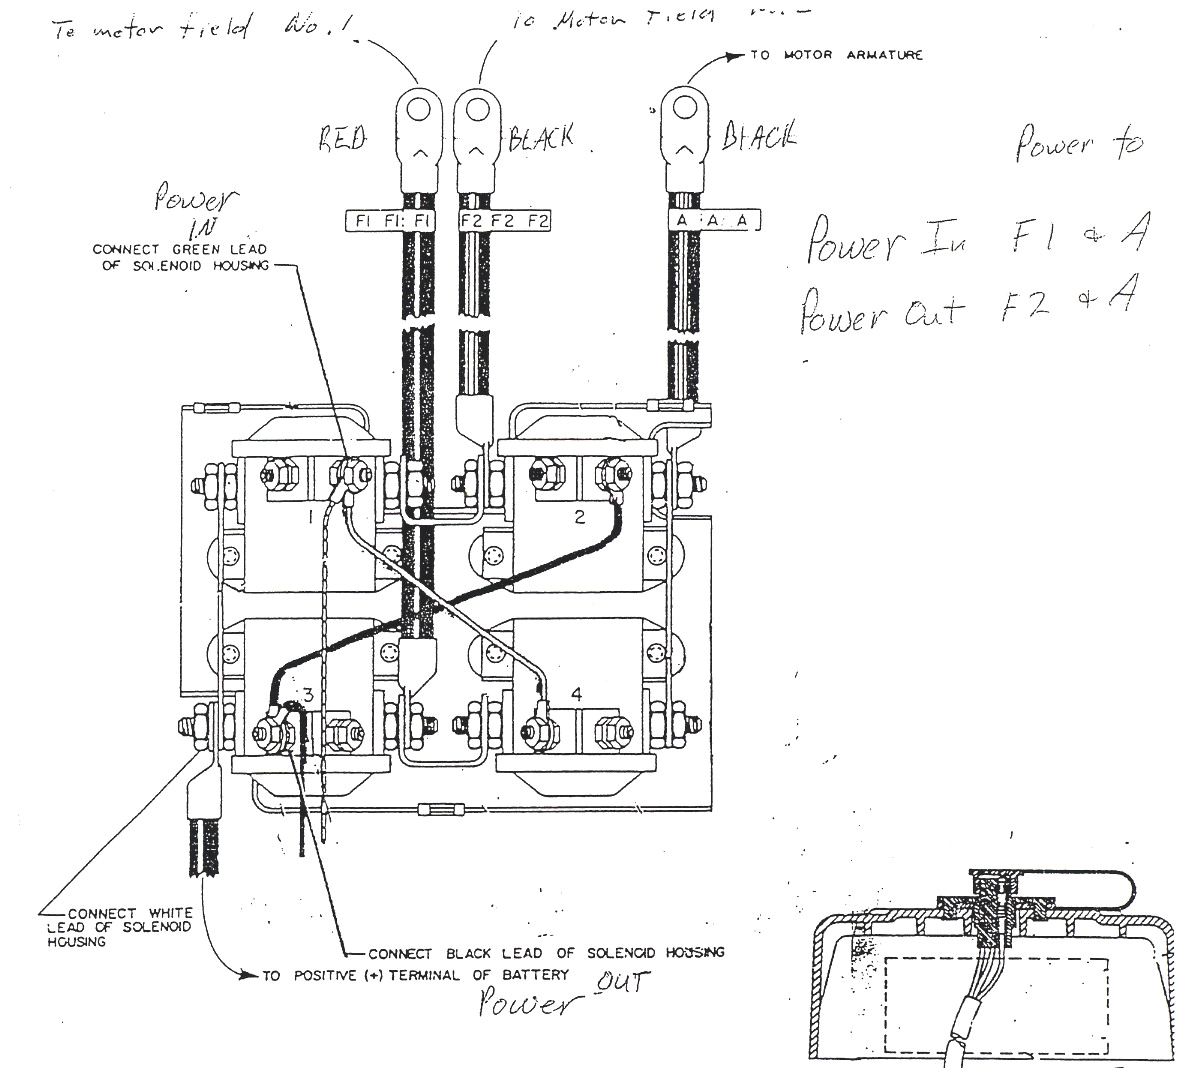 quadboss 2500lb winch wiring diagram wiring library need help wiring winch if someone could look over